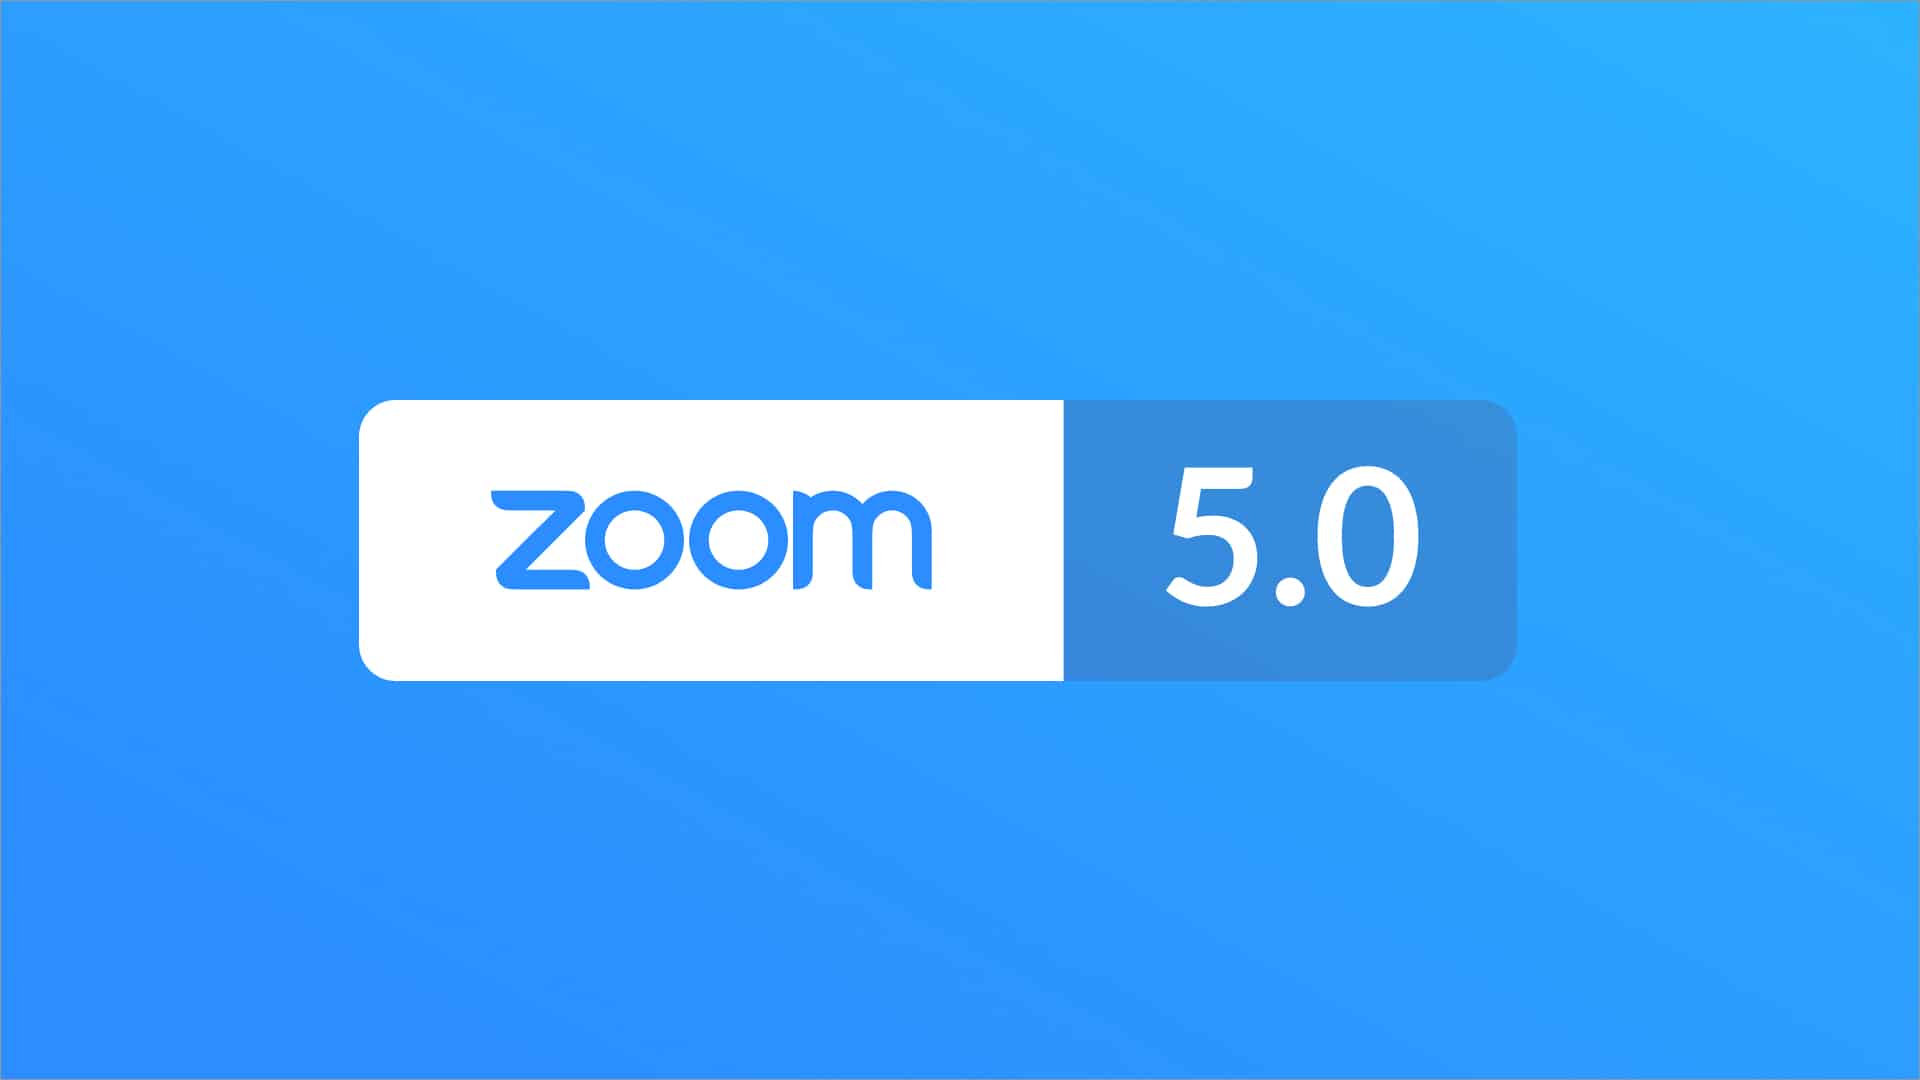 Tax Evasion : How Zoom paid $0 in 2020 despite record breaking profits.